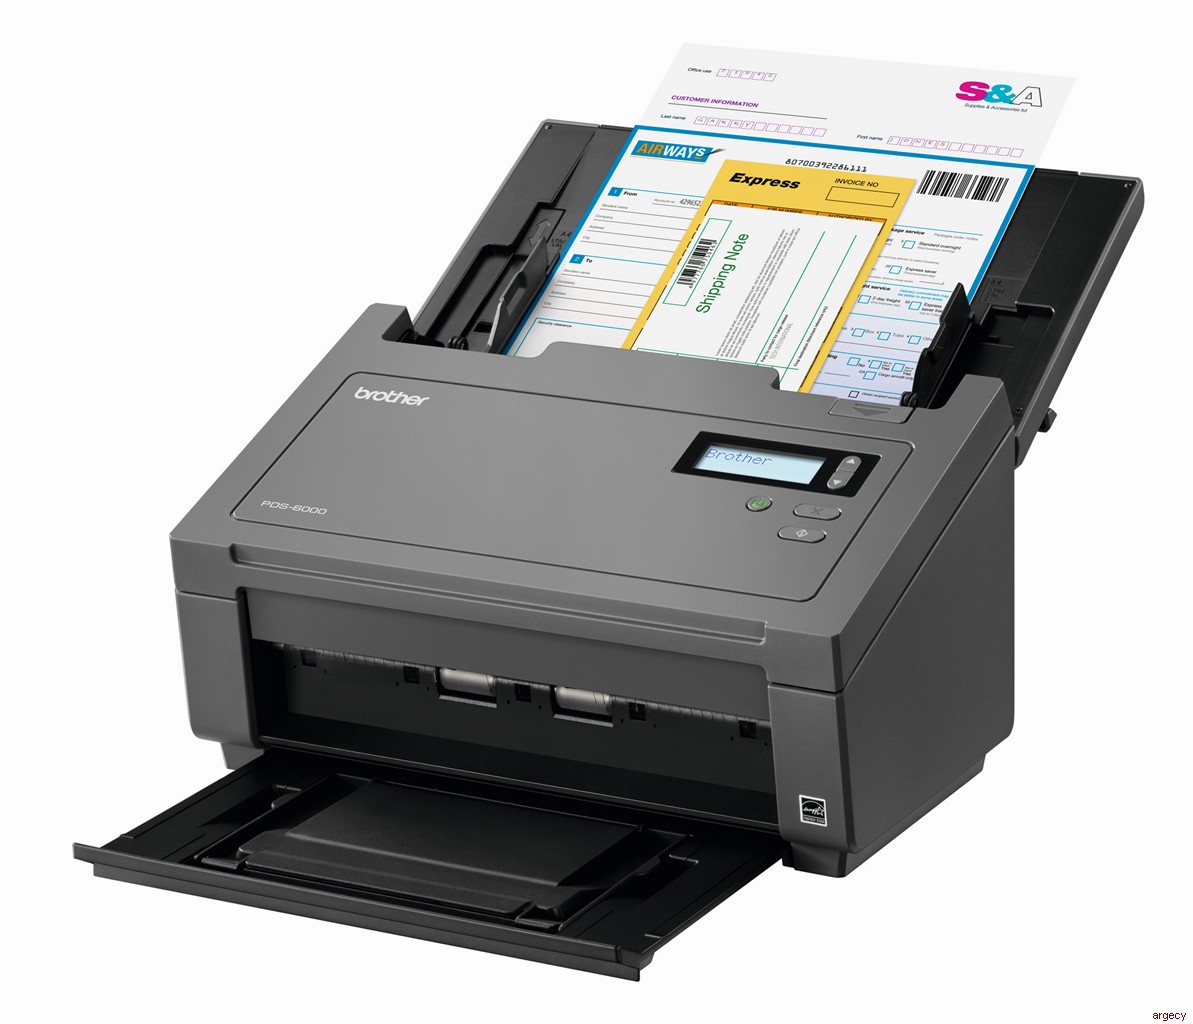 Brother PDS6000 Scanner